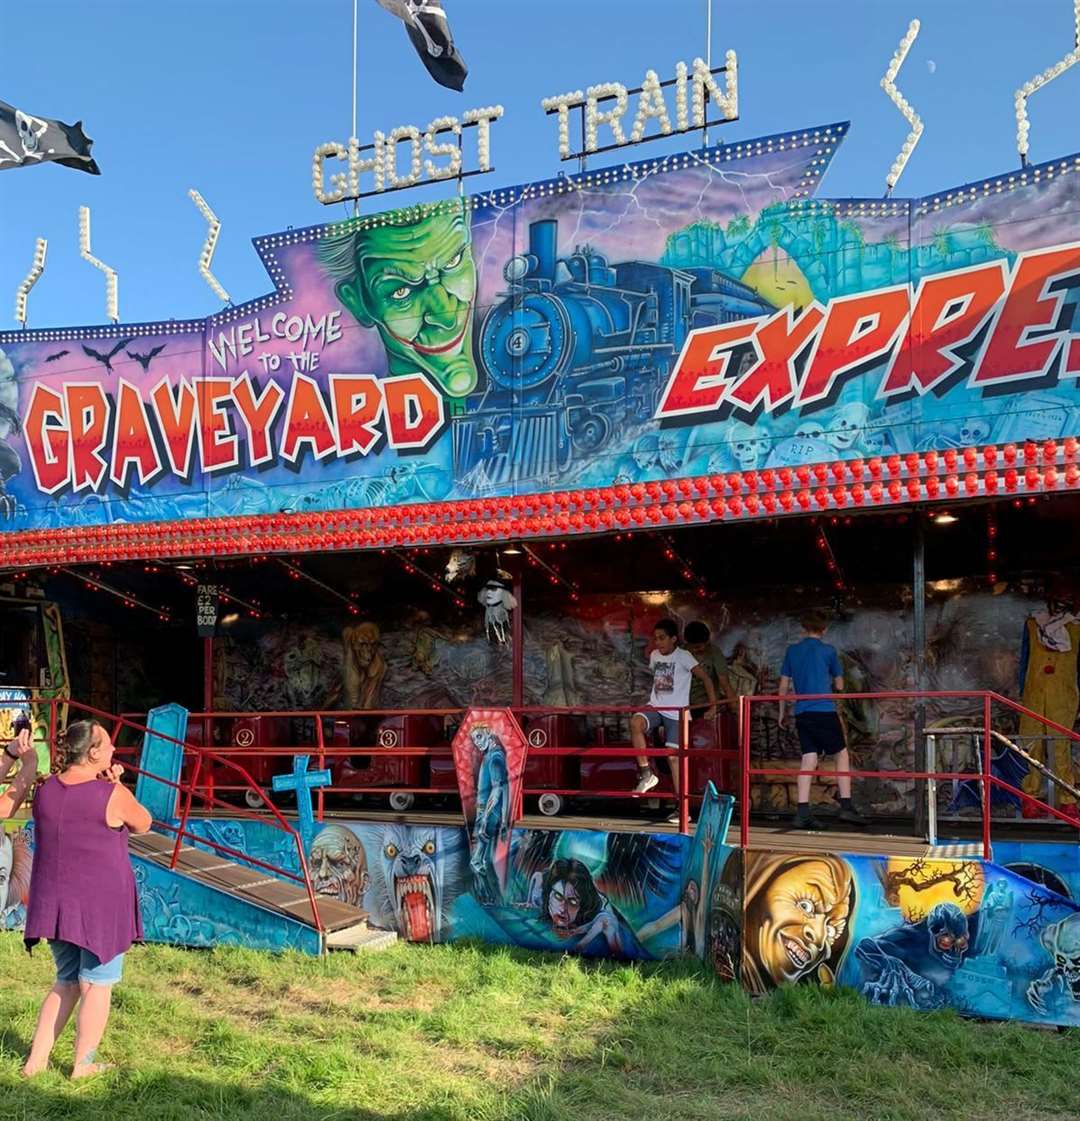 Can you join the staff of the Graveyard Express ghost train when it joins Smith's Family Funfair at Leysdown, Sheppey?